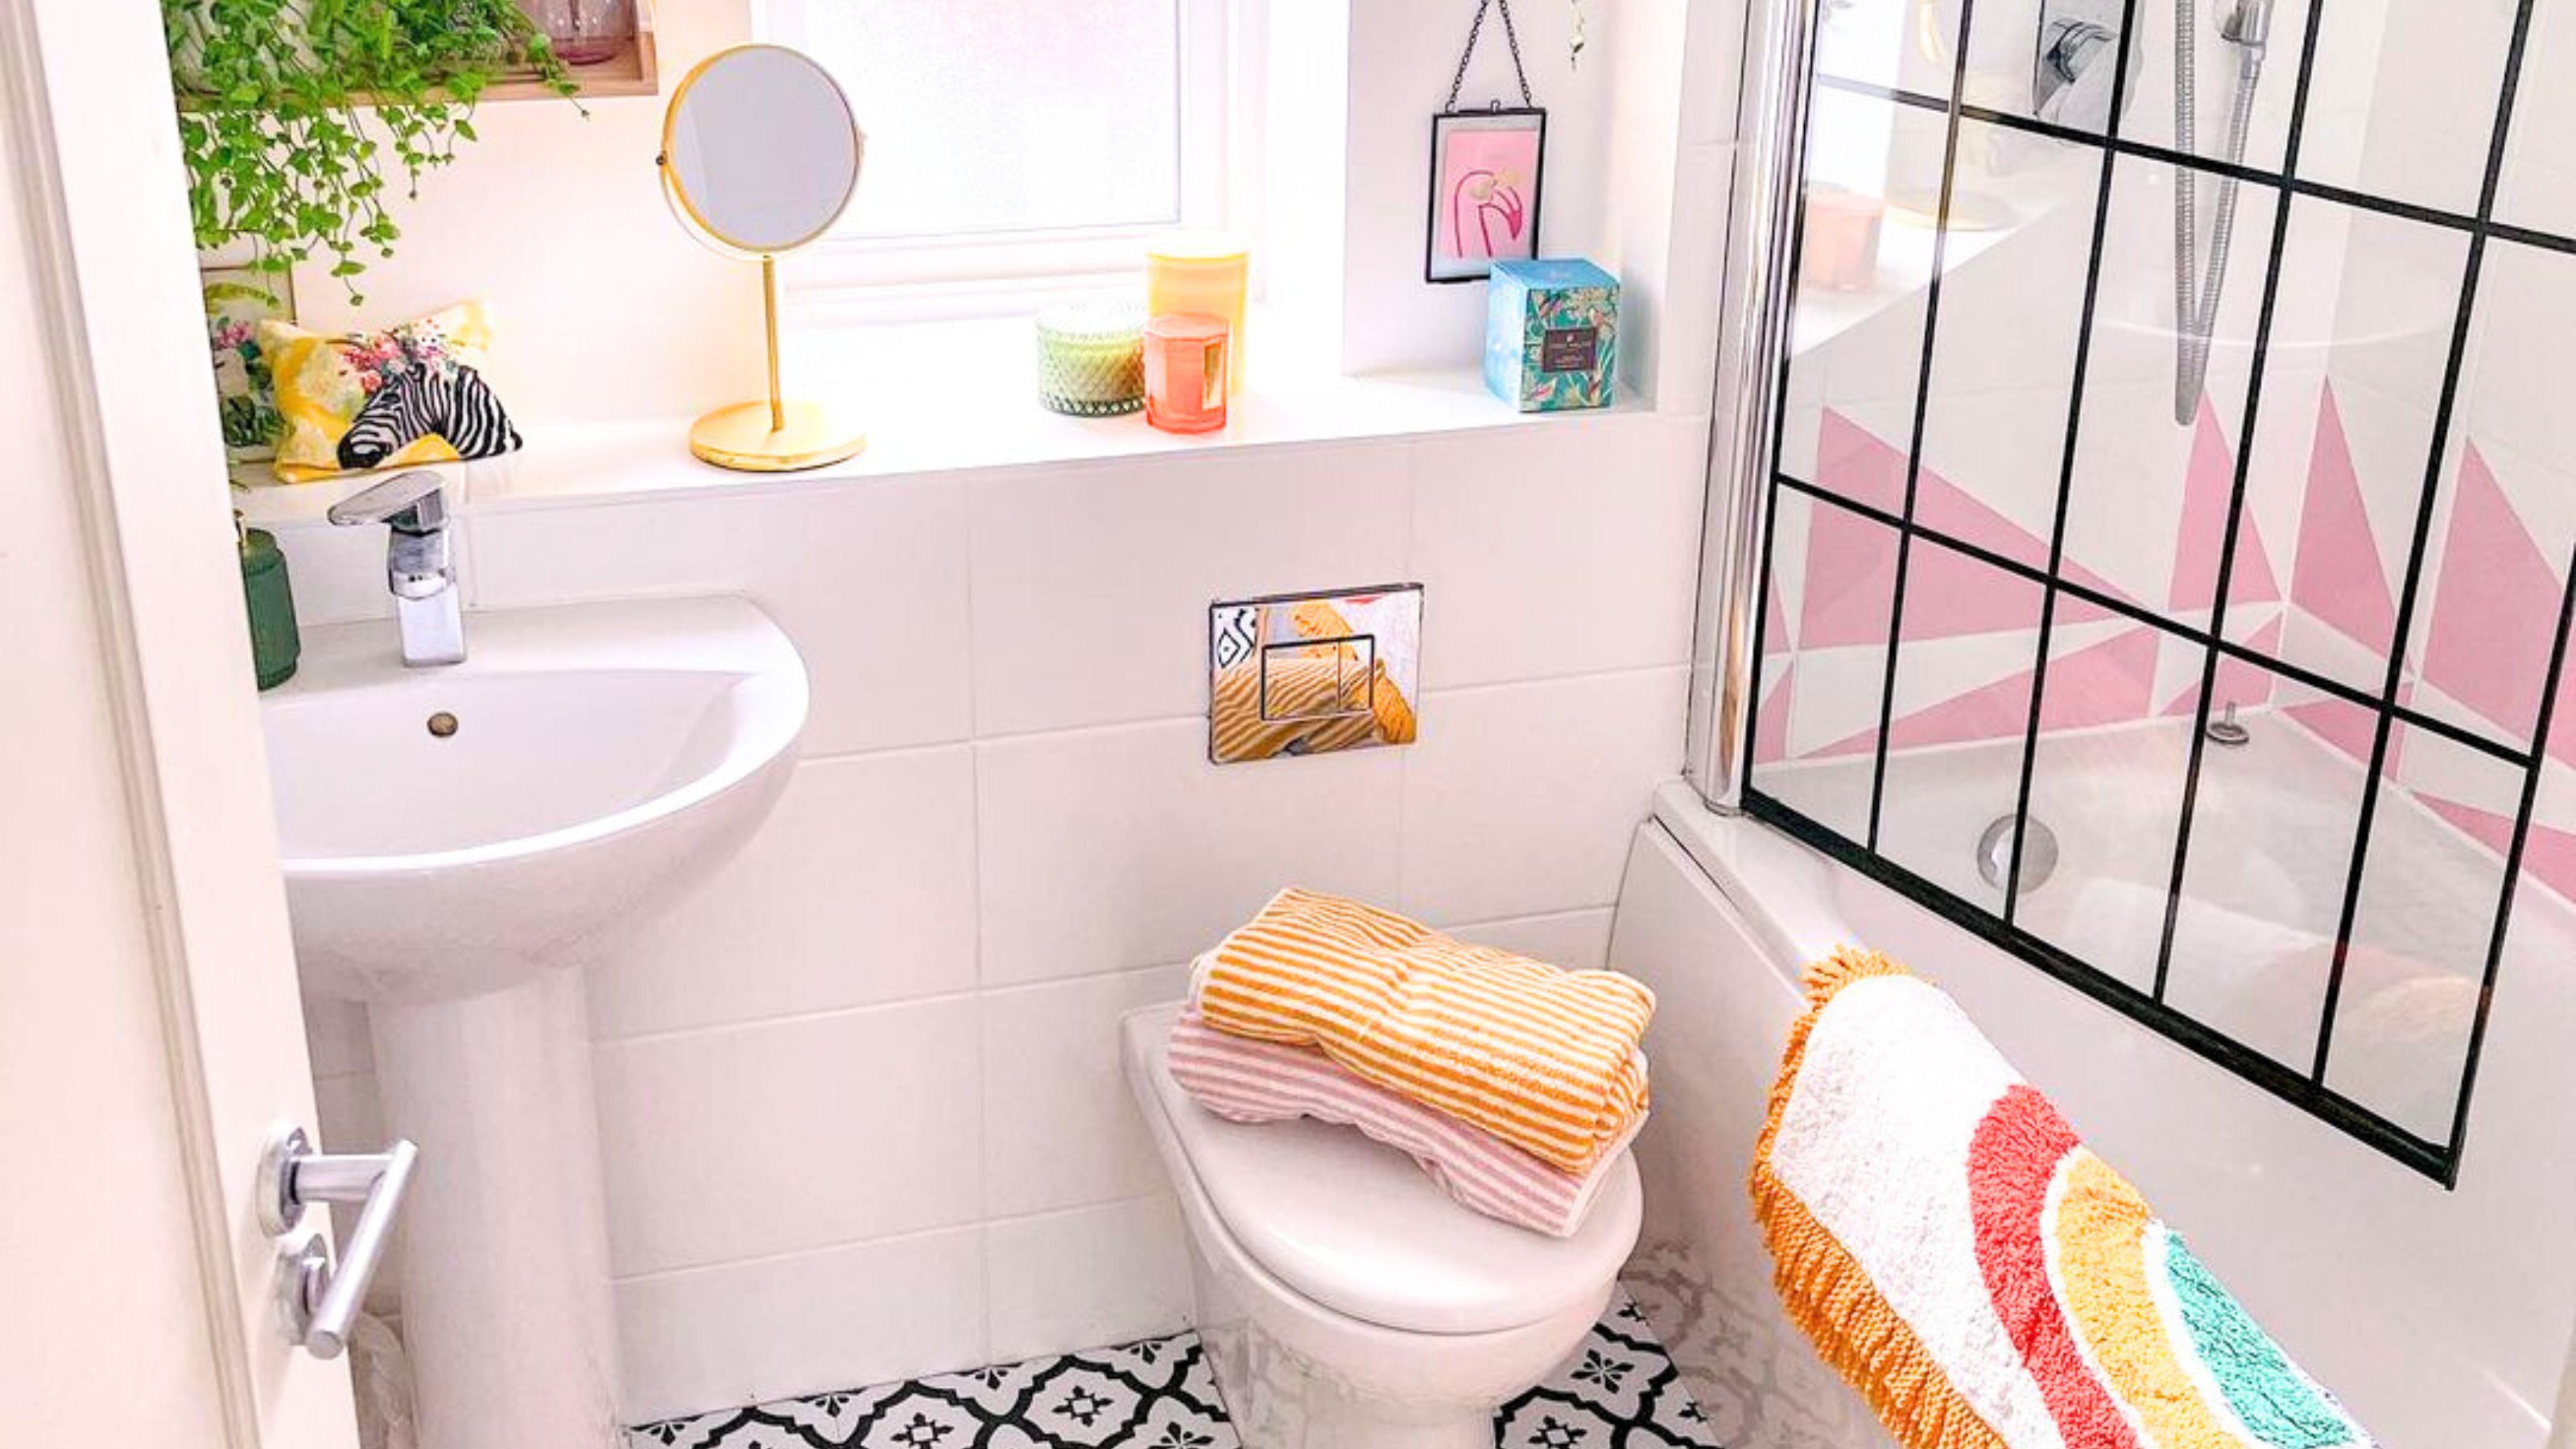 Over-the-sink makeup mat: Solution for cramped bathrooms